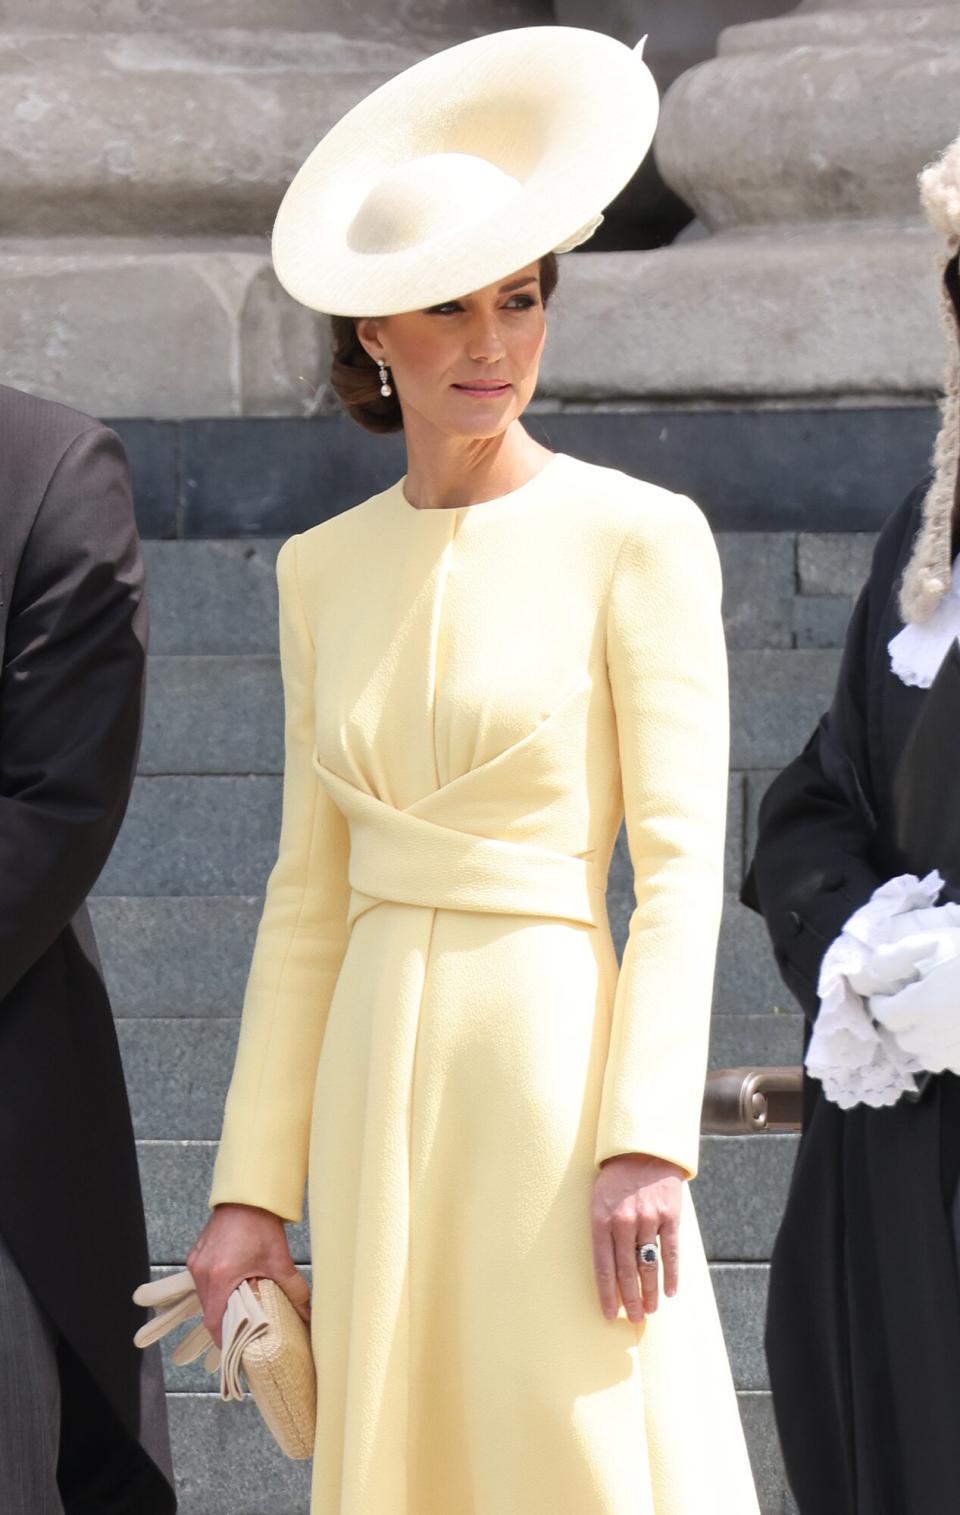 Catherine, Duchess of Cambridge departing St. Paul's Cathedral after the Queen Elizabeth II Platinum Jubilee 2022 - National Service of Thanksgiving on June 03, 2022 in London, England